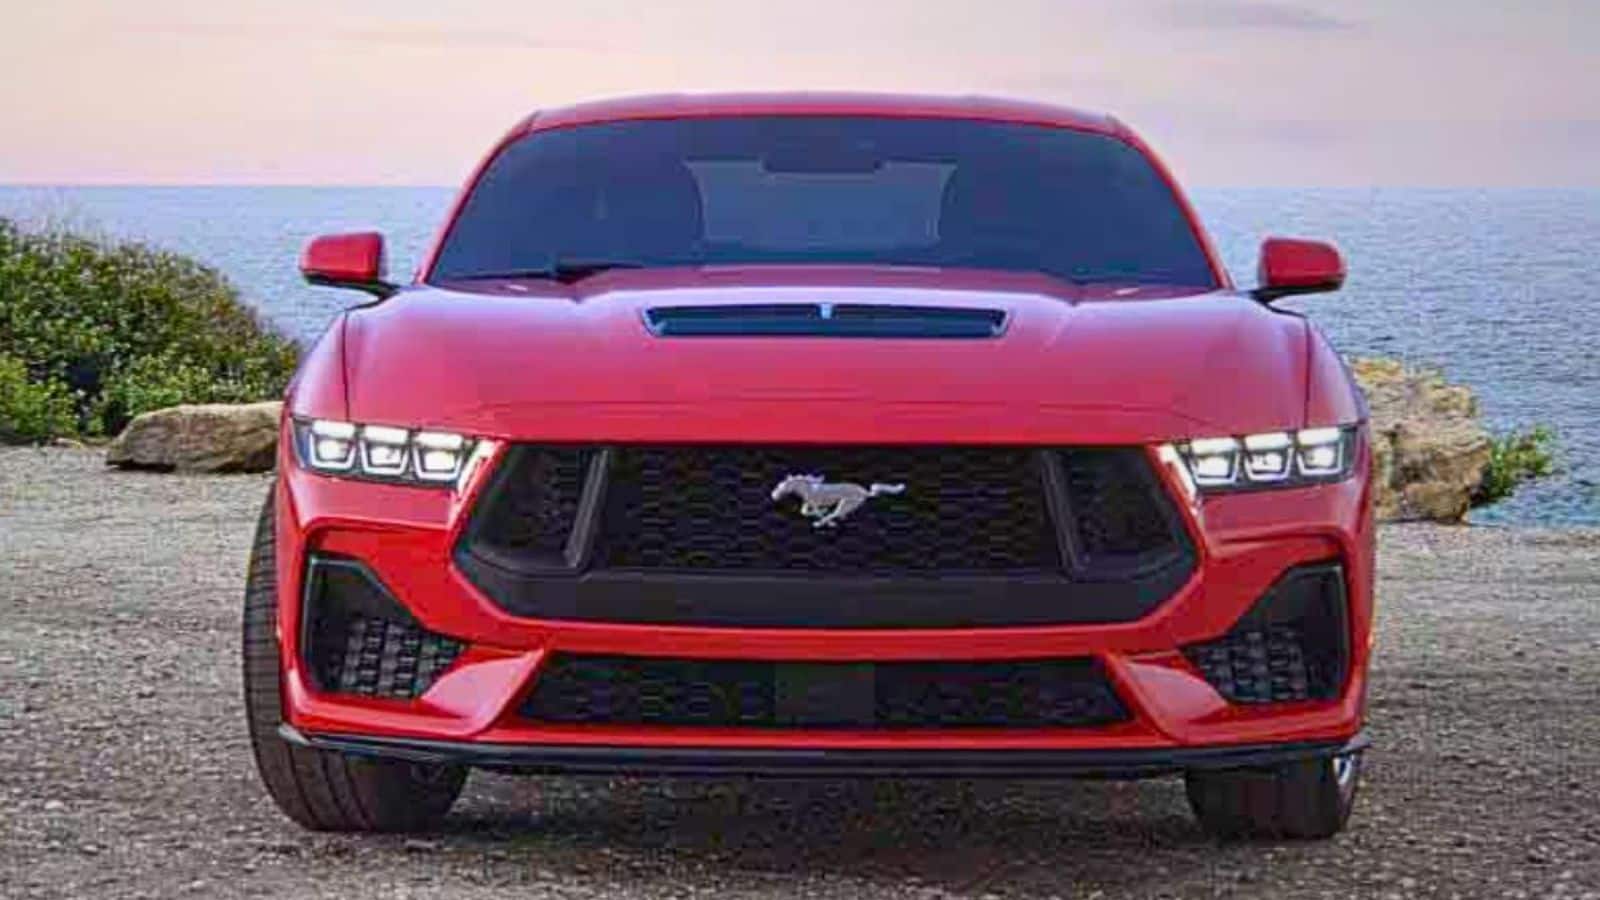 Ford is considering introducing 4-door Mustang variant: Expected features